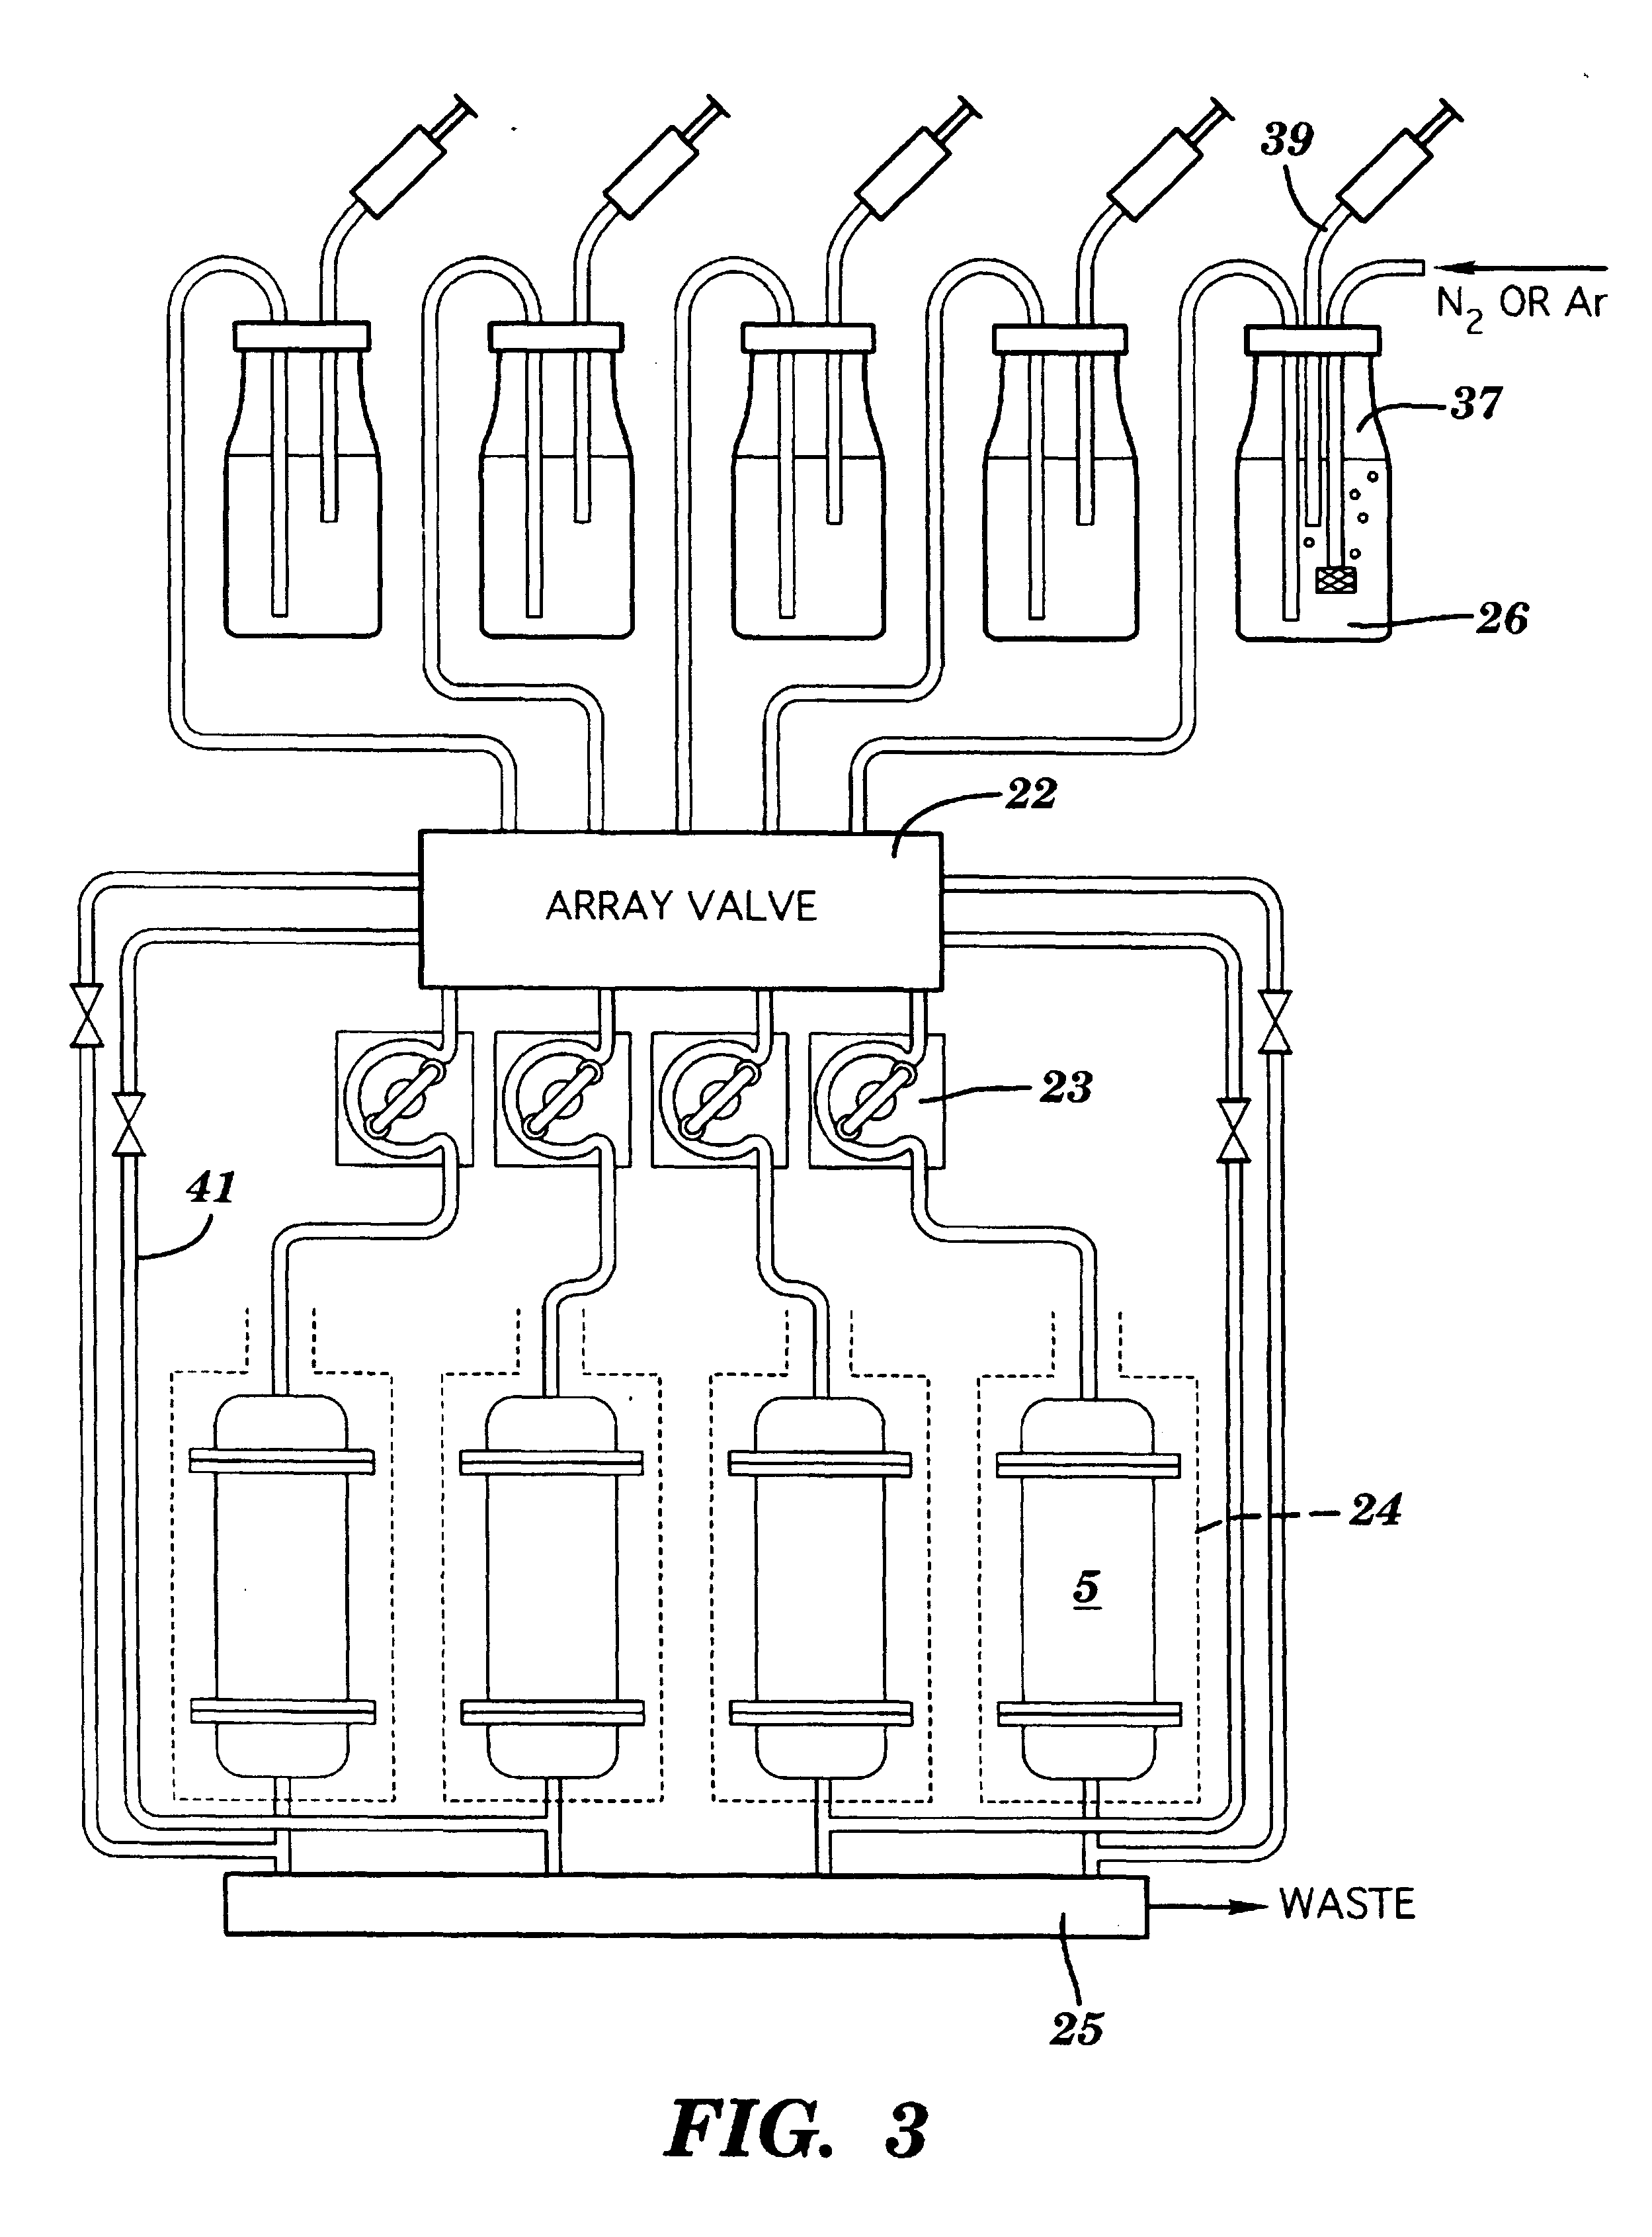 High throughput solid phase chemical synthesis utilizing thin cylindrical reaction vessels useable for biological assay